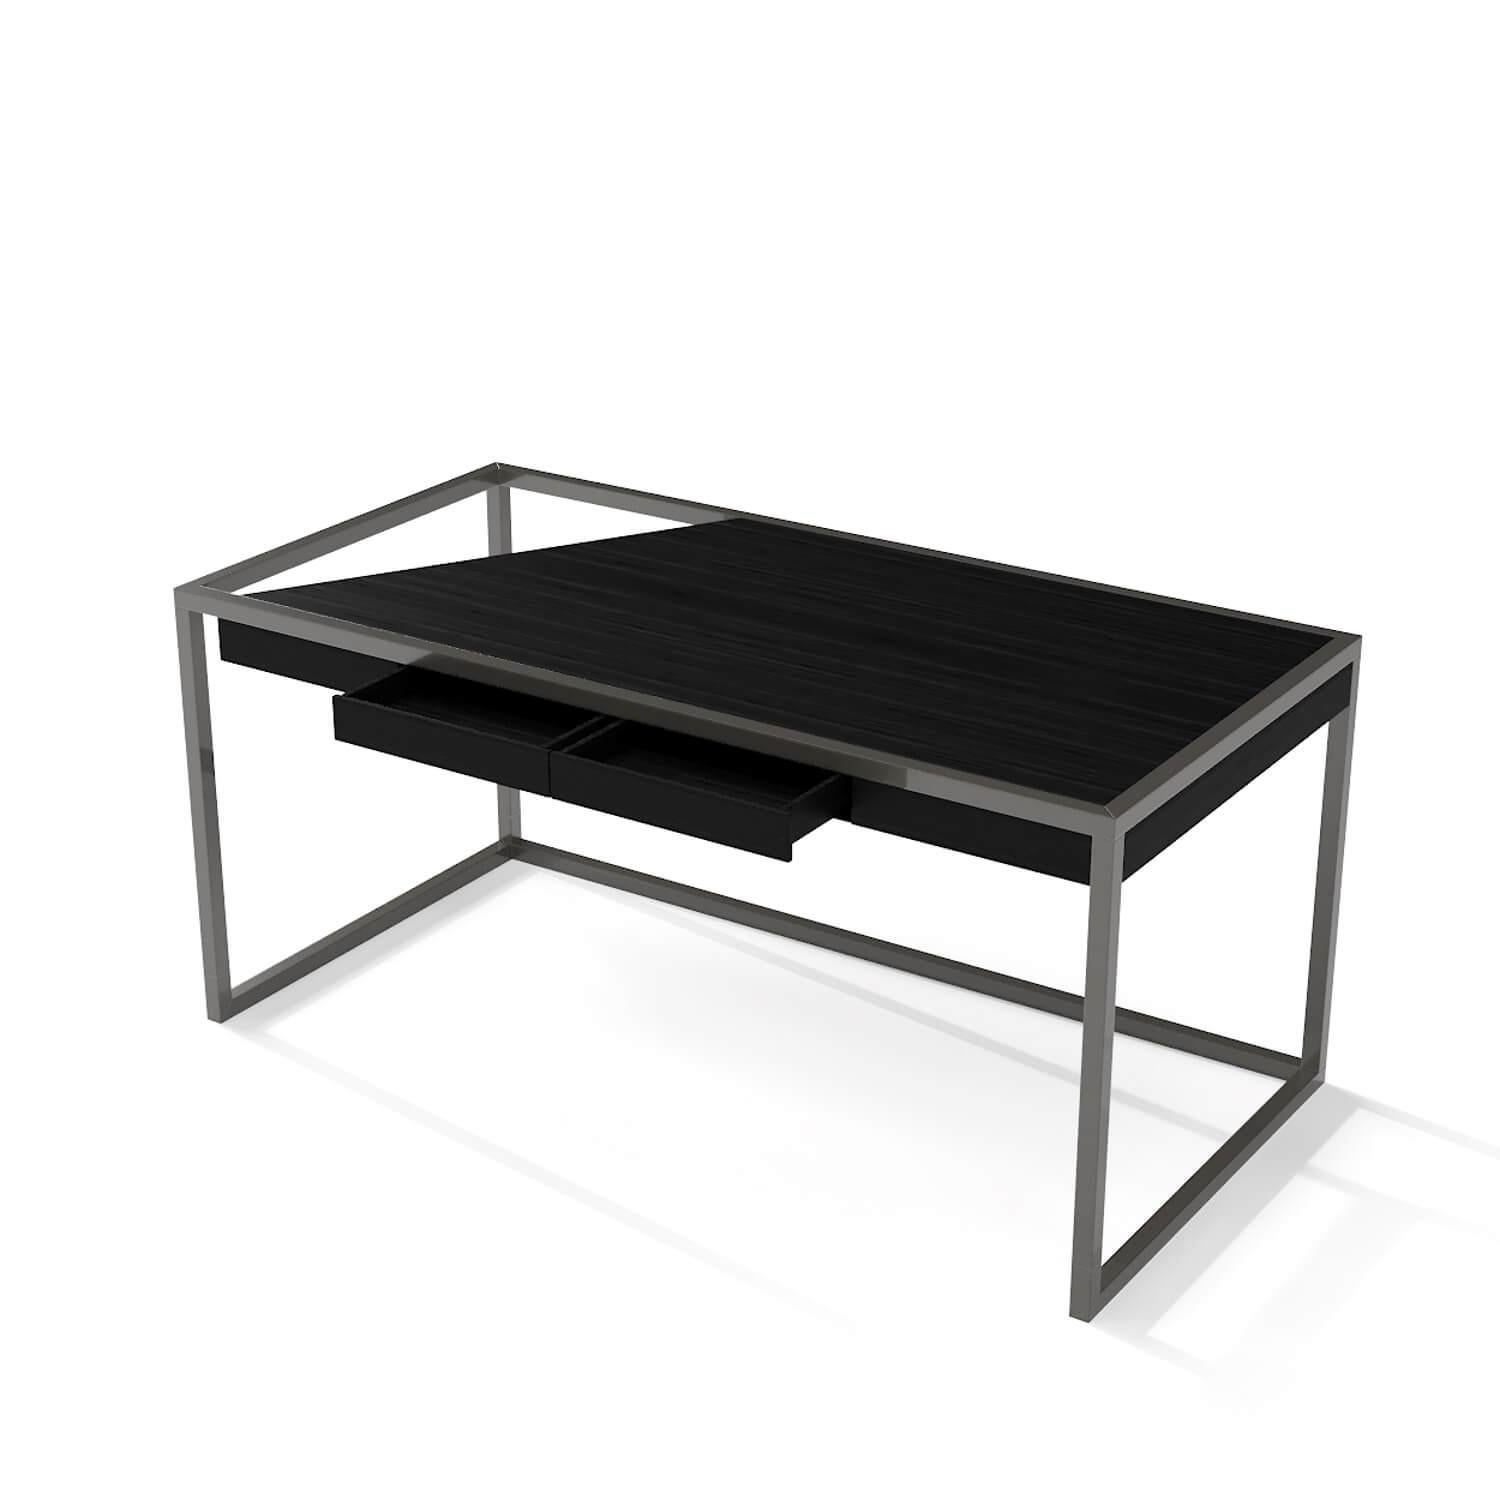 Portuguese Modern Minimalist Home Office Writing Desk in Black Oak Wood and Black Lacquer For Sale